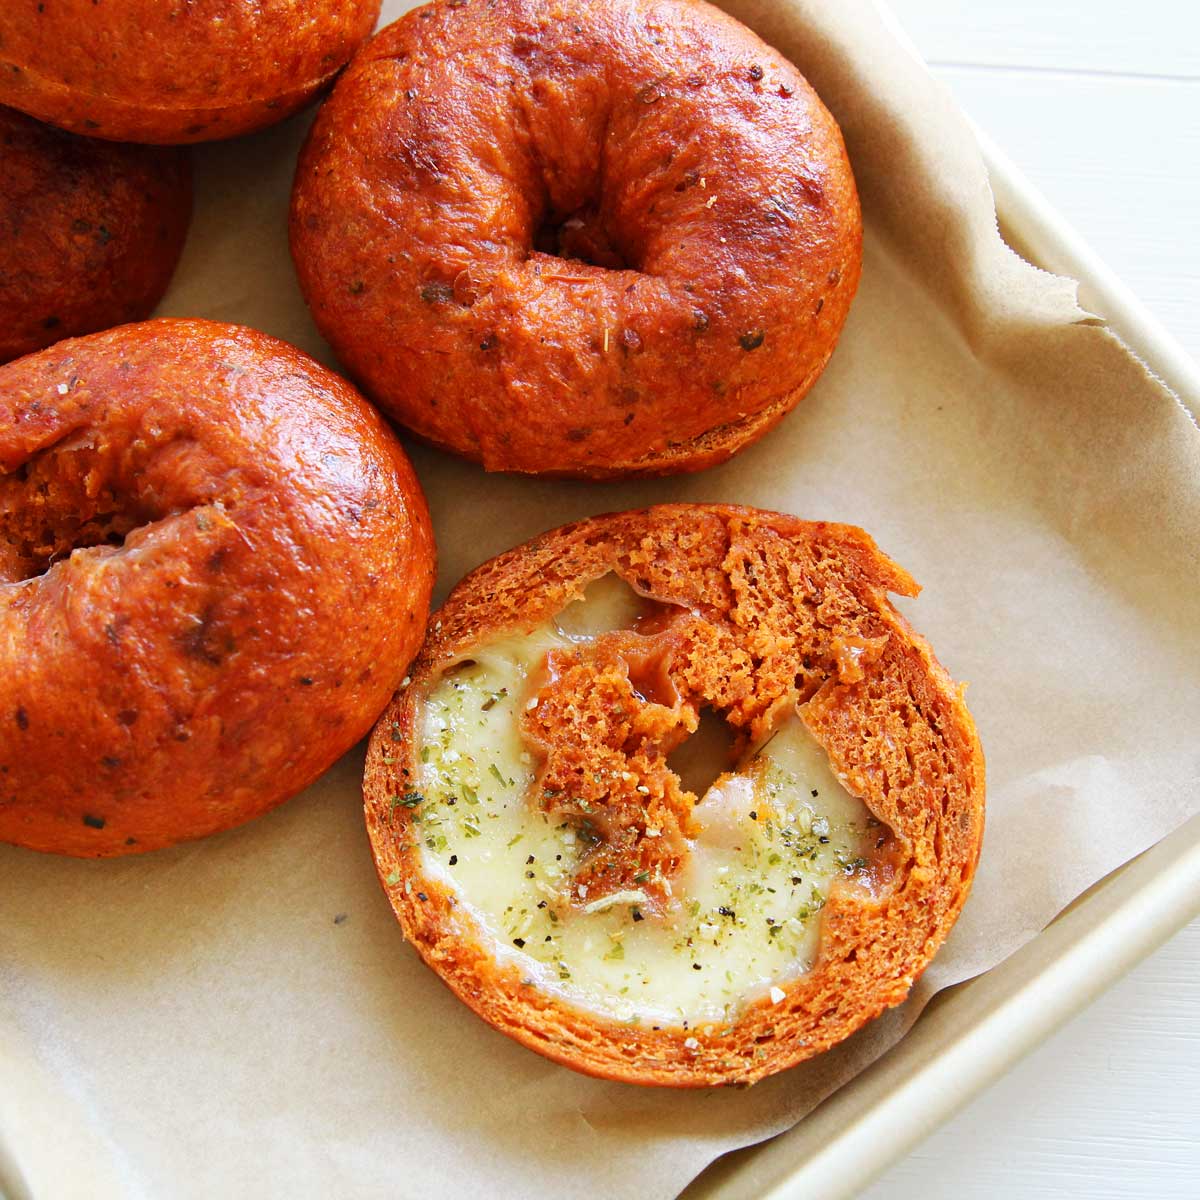 Game-changing Pizza Bagels! Overnight Tomato Bagels Stuffed With Cheese - naan pizza